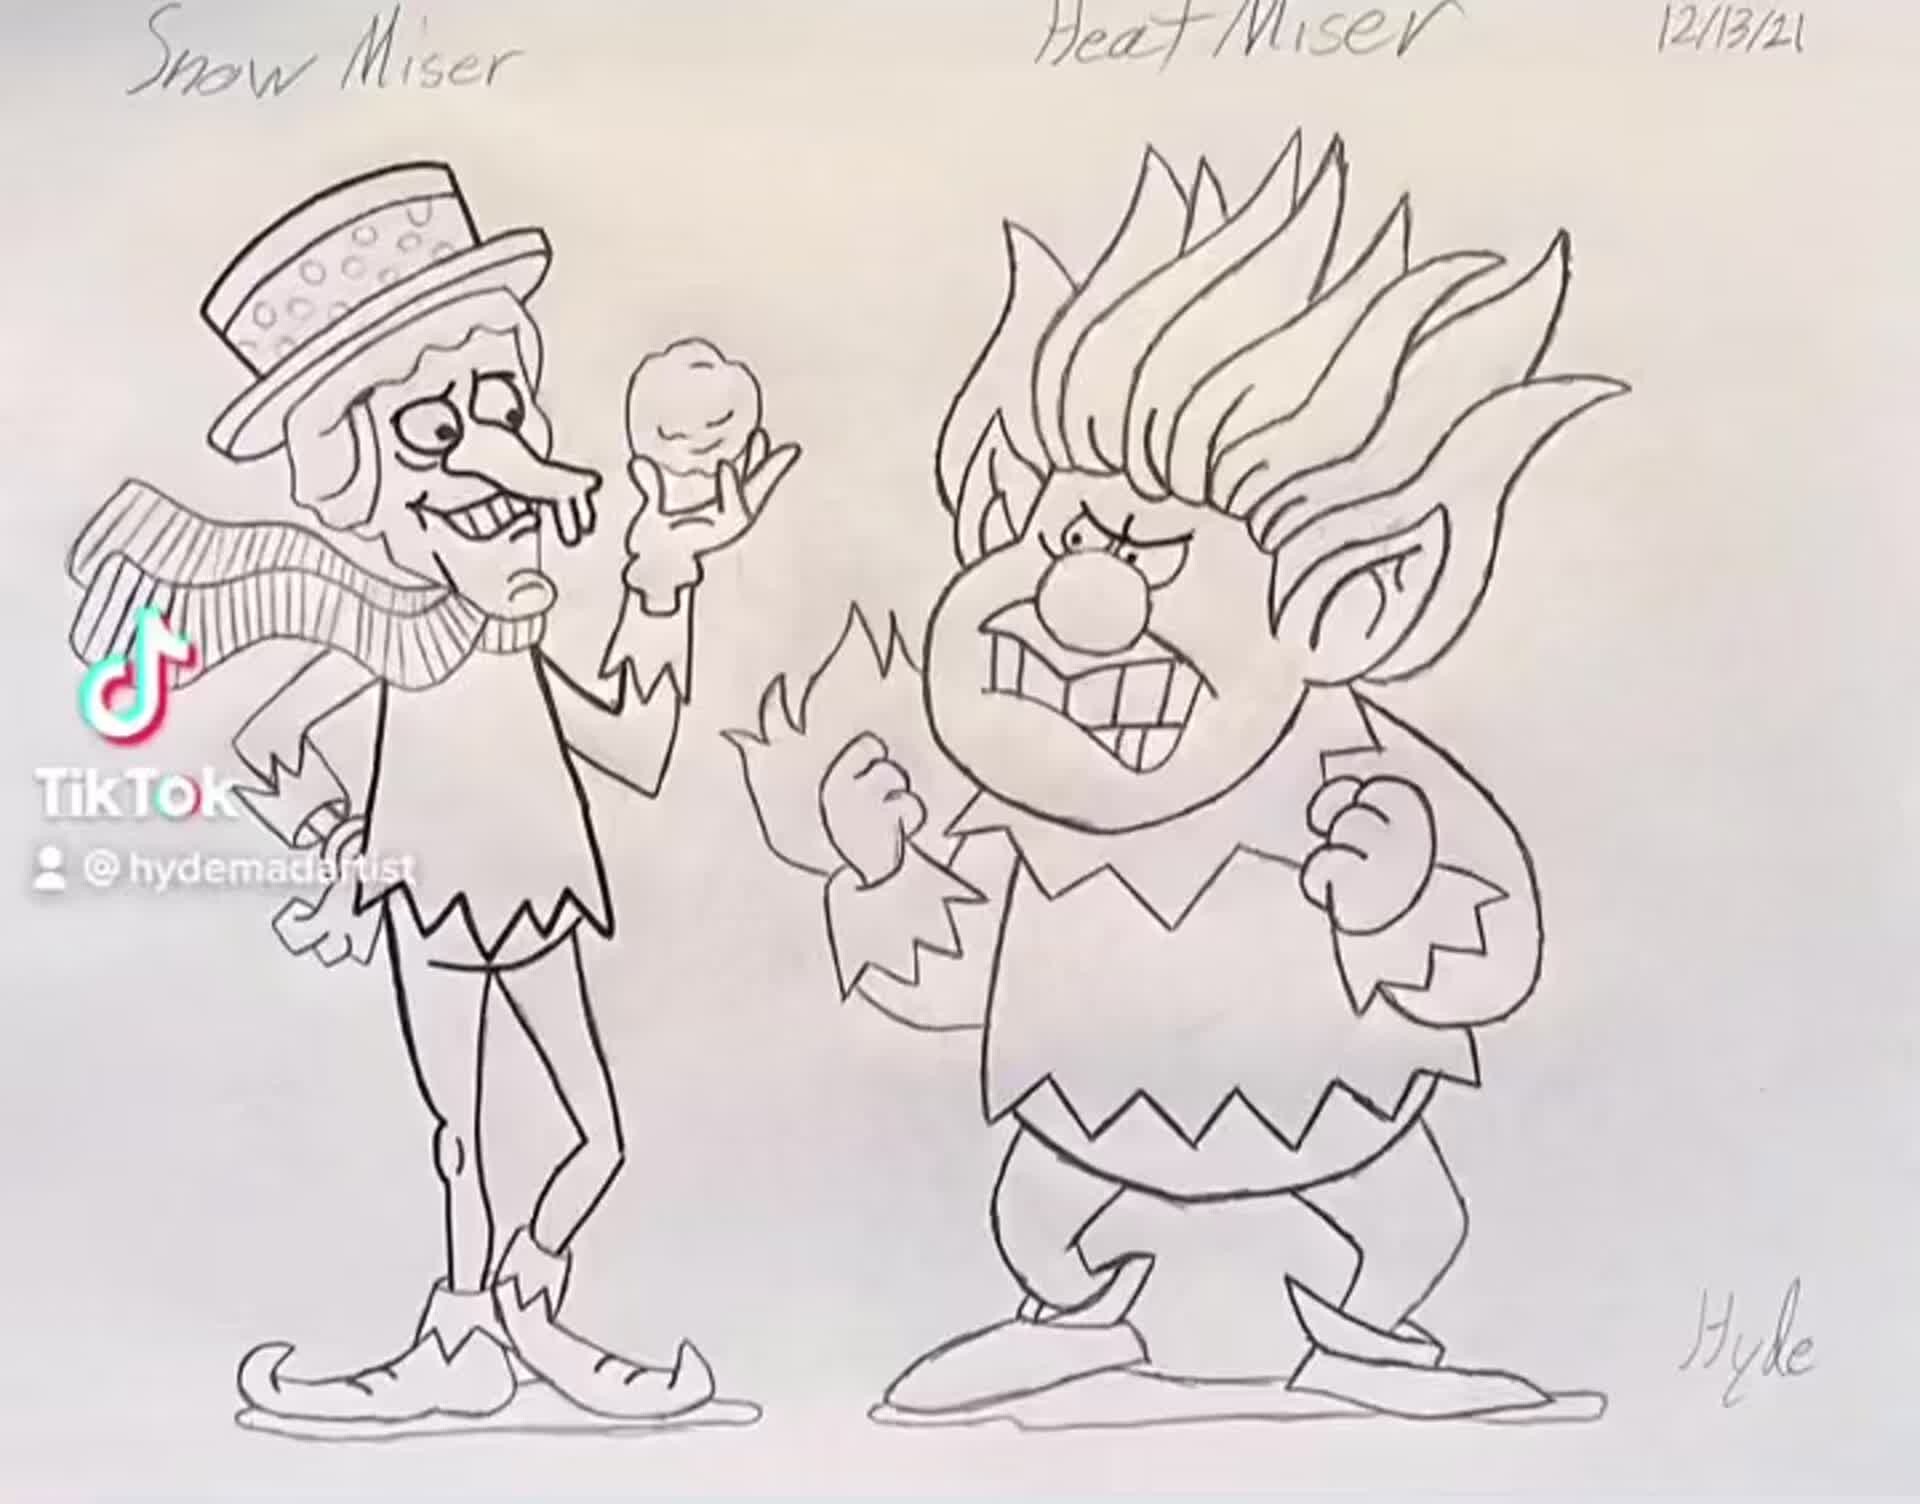 ArtStation Snow Miser and Heat Miser and after